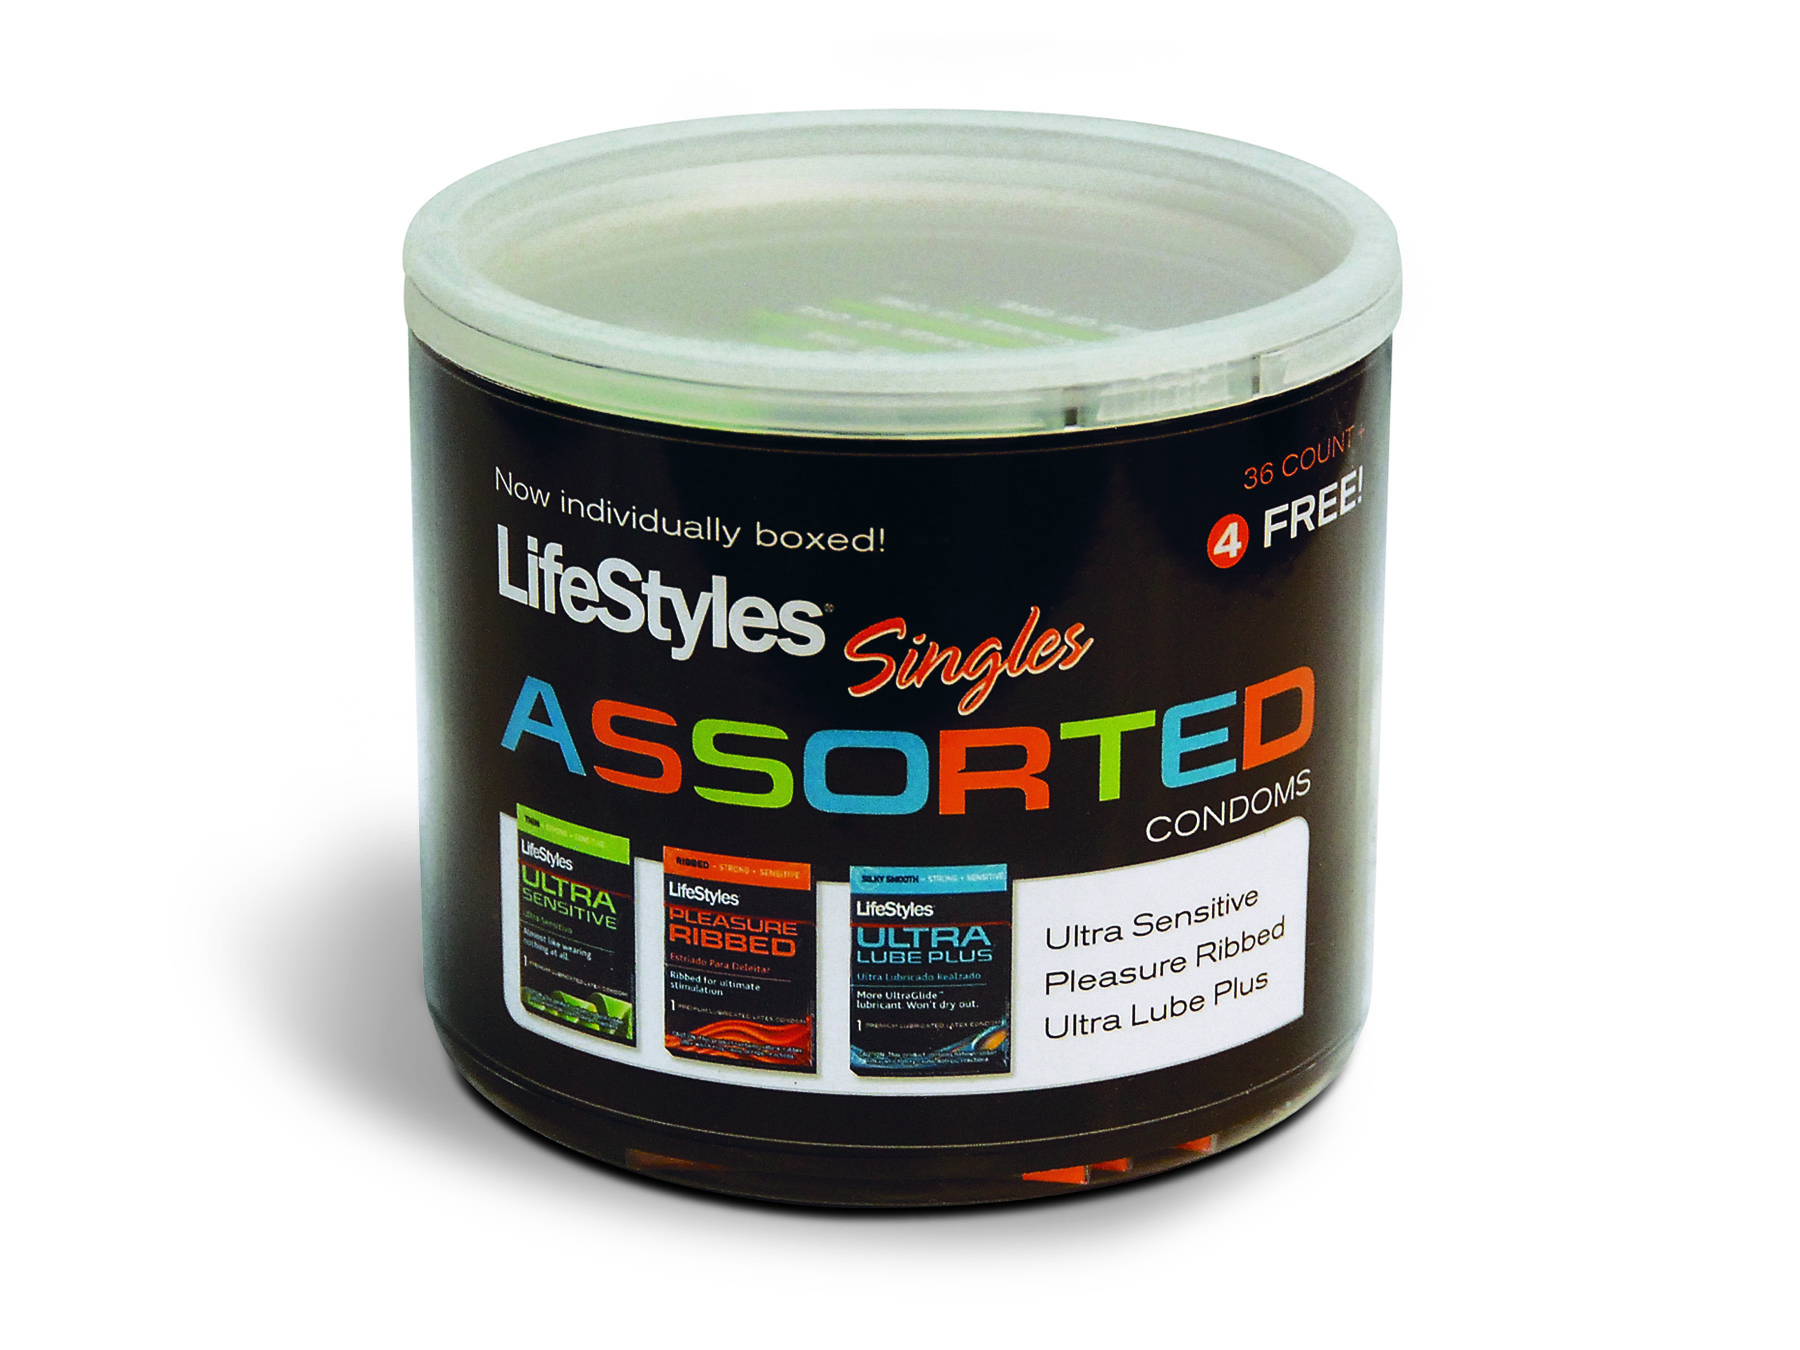 Lifestyles Assorted Singles - 40 Count Jar